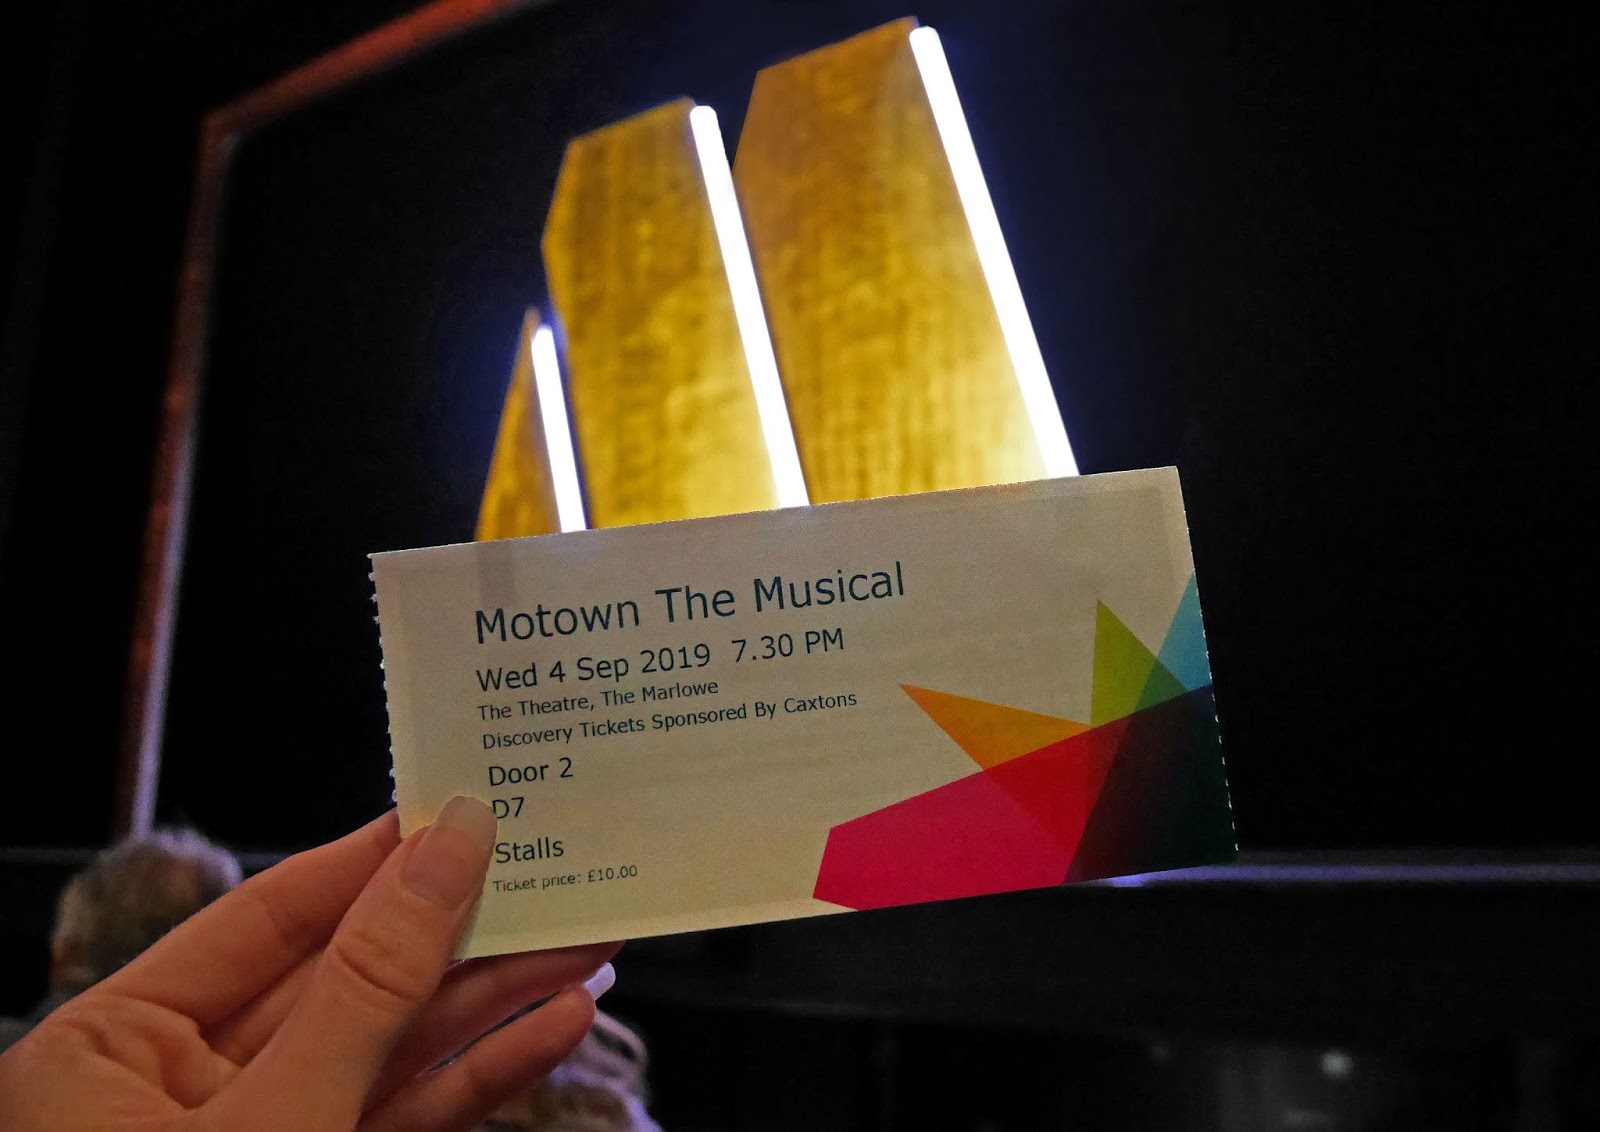 My Discovery Ticket for Motown The Musical at the Marlowe Theatre, Canterbury